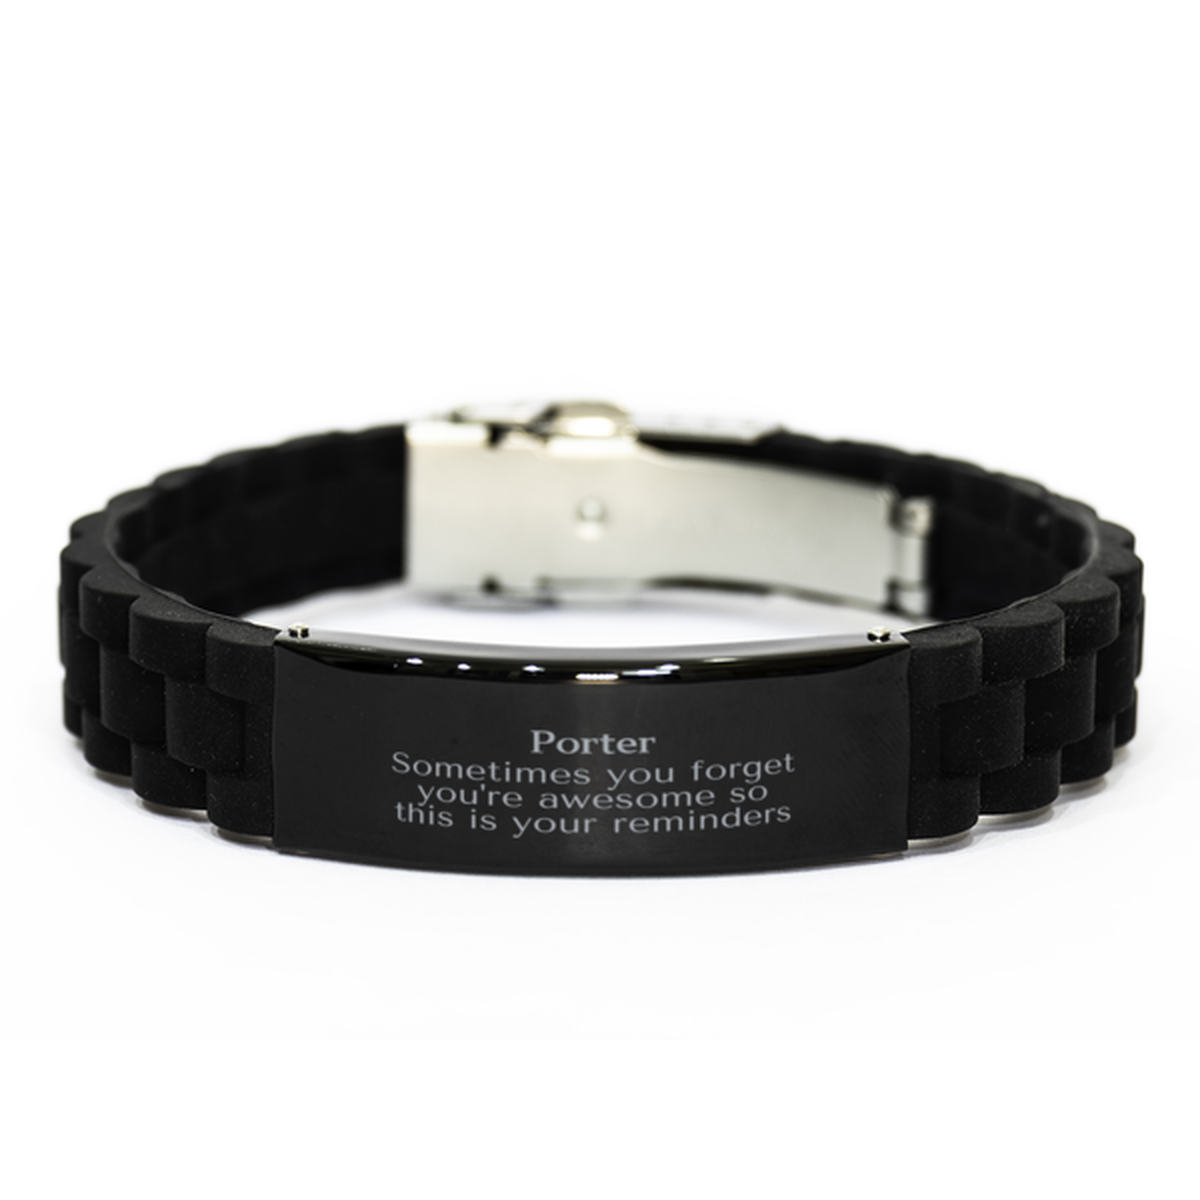 Sentimental Porter Black Glidelock Clasp Bracelet, Porter Sometimes you forget you're awesome so this is your reminders, Graduation Christmas Birthday Gifts for Porter, Men, Women, Coworkers